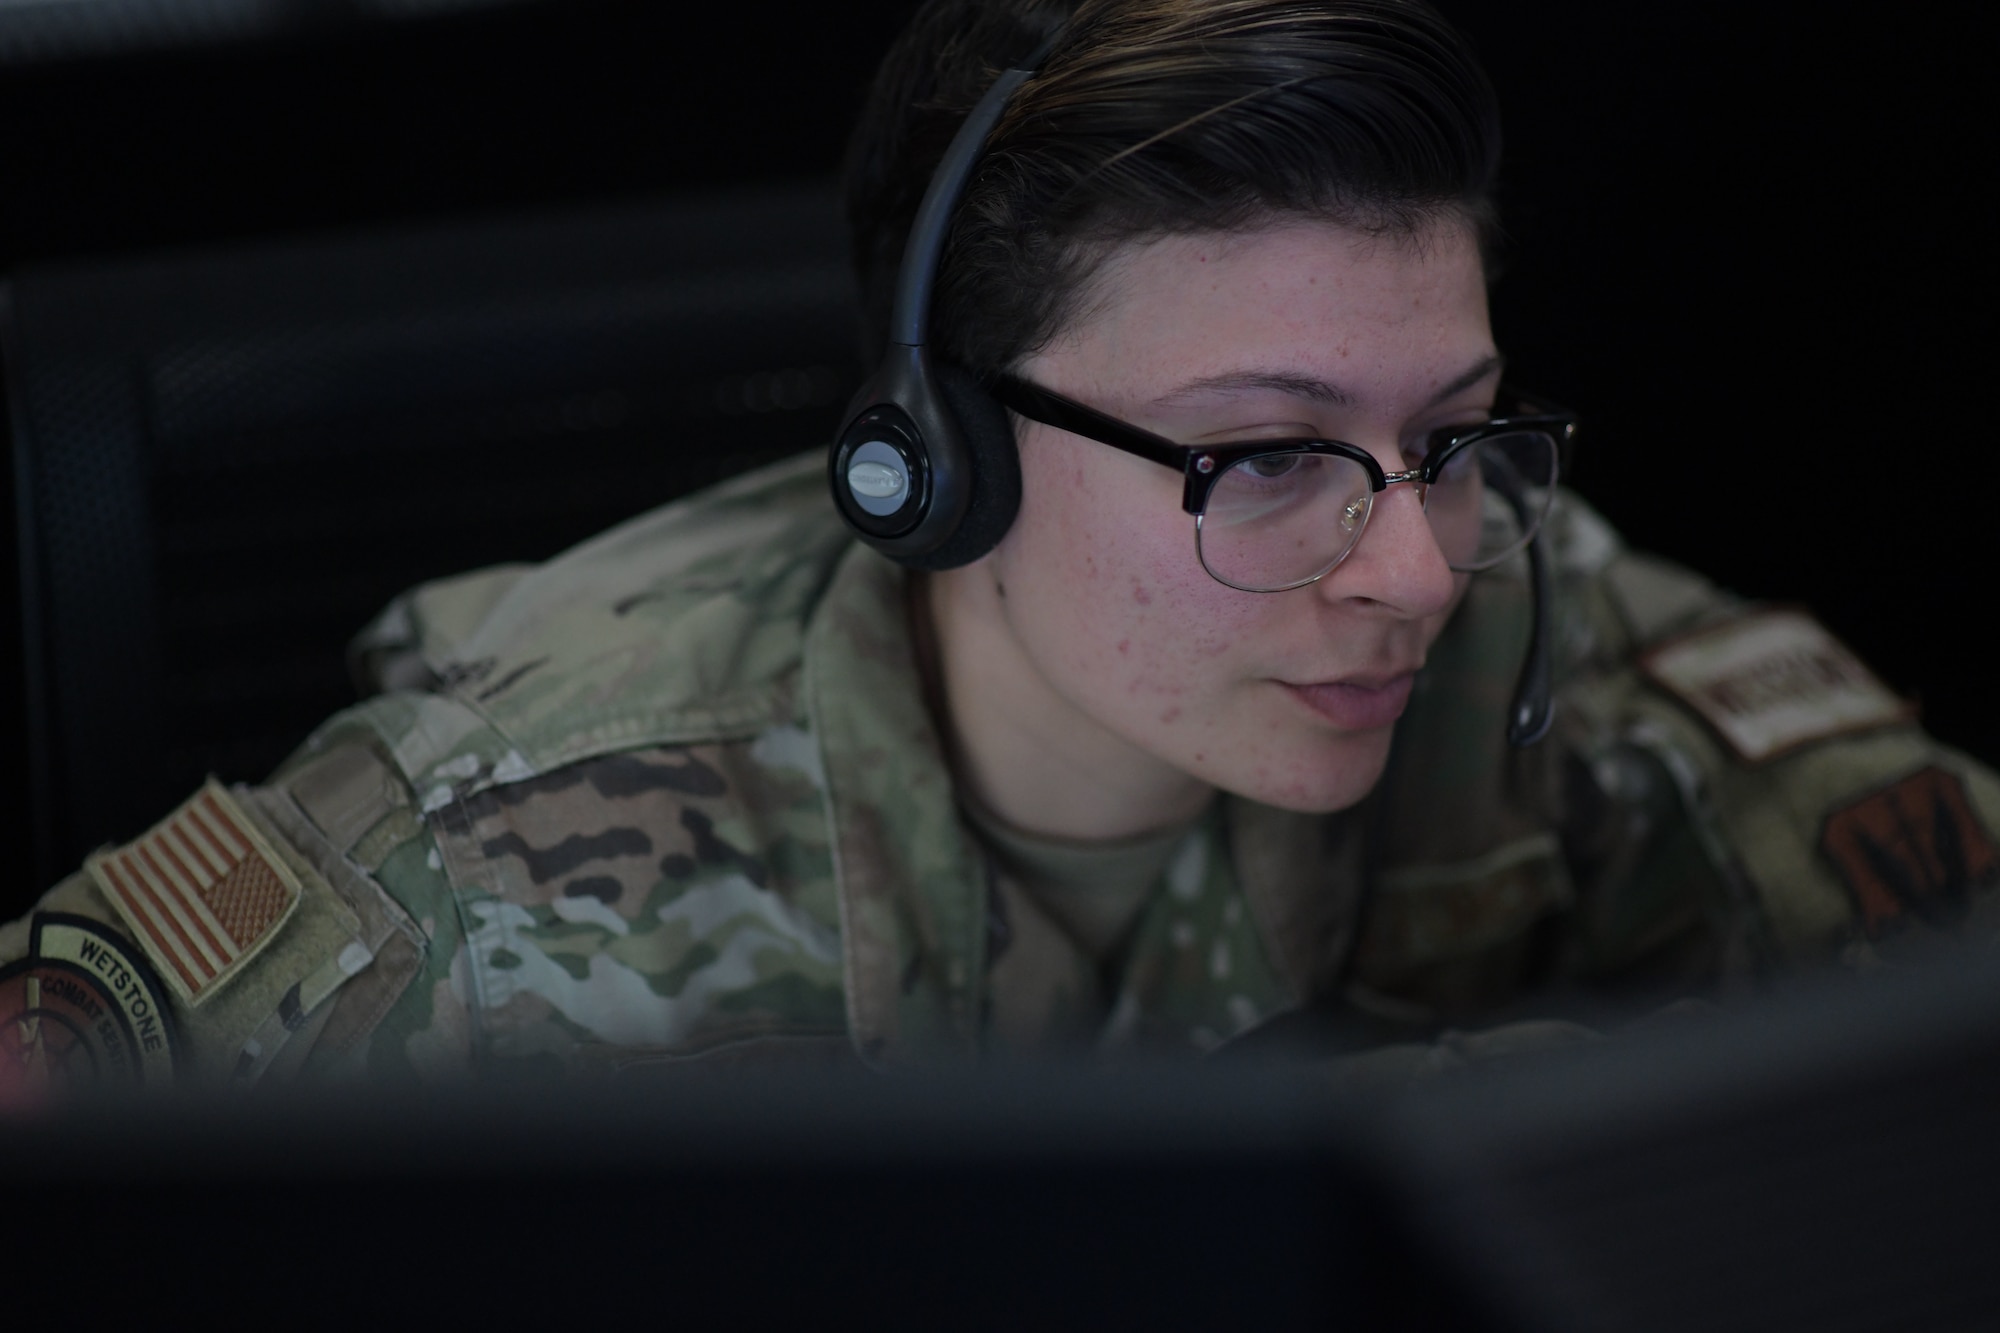 U.S. Air Force Senior Airman Megan Teran, left, 81st Air Control Squadron weapons director, informs pilots of potential threats via radio communication during Weapons System Evaluation Program East 22.06 at Tyndall Air Force Base, Florida, March 29, 2022.